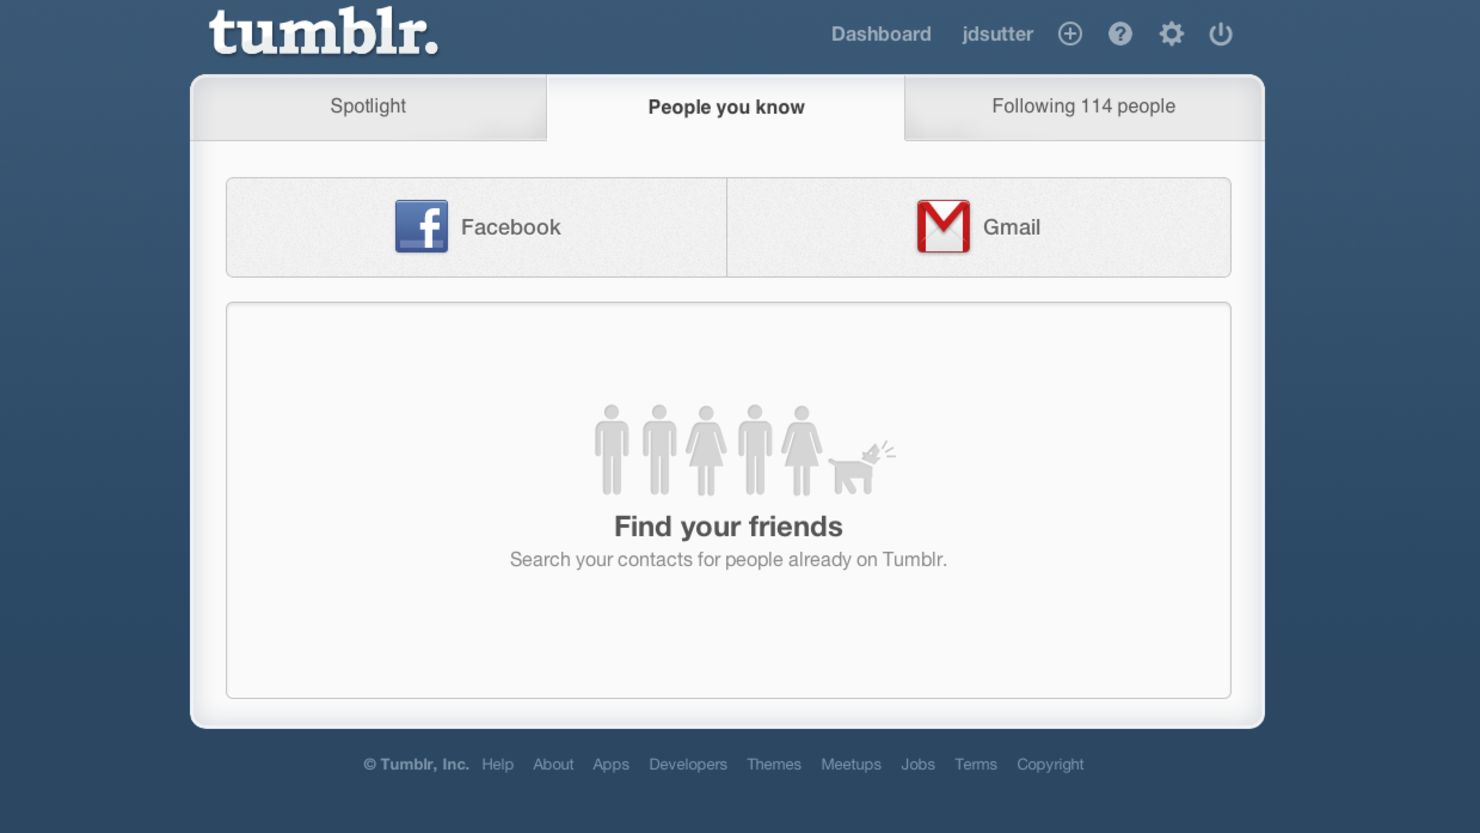 Twitter revoked access to a friend-finder feature on Tumblr.